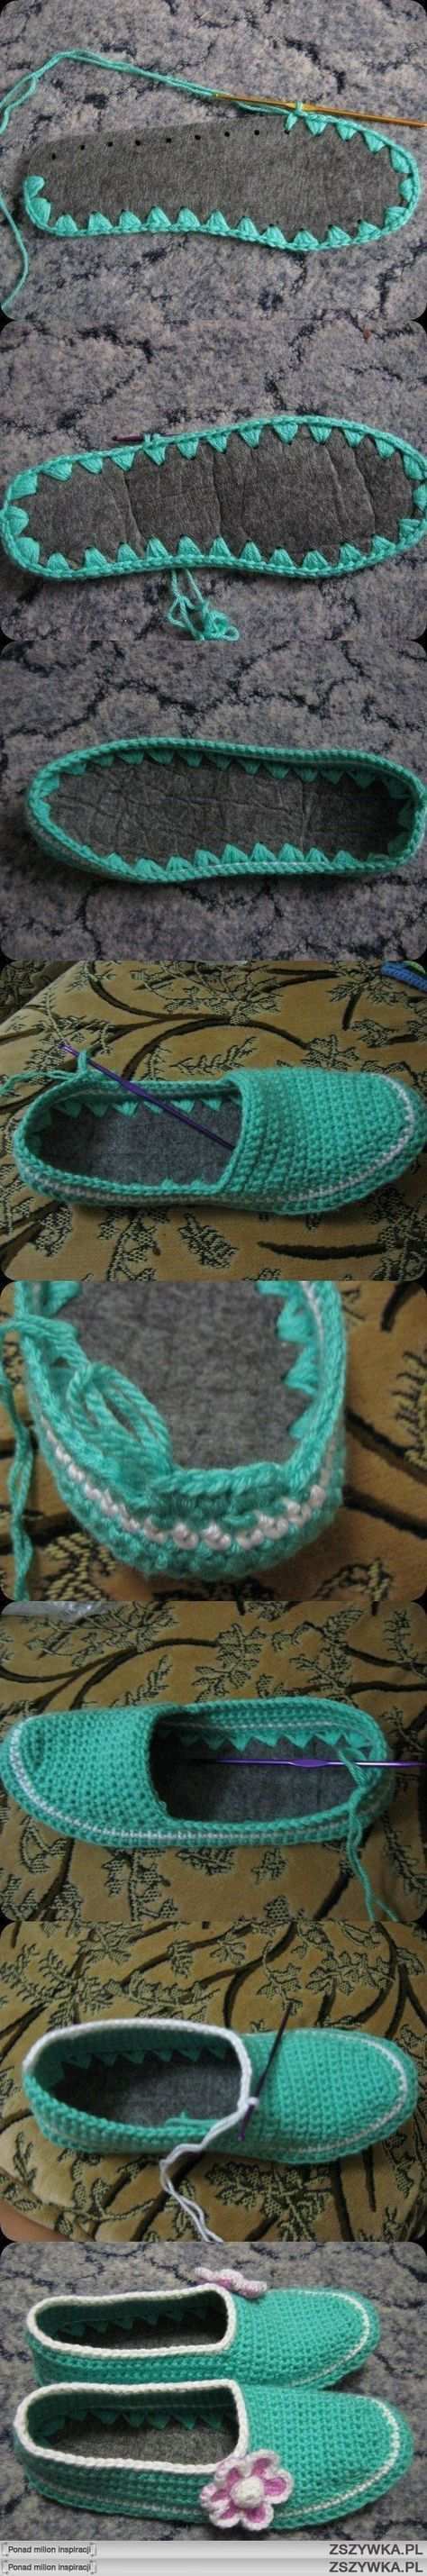 Crochet Slippers I Have To Try These I Know A Little Bug That May Love Them Crochet Earrings Crochet Do In 2020 Stricken Schuhe Hakeln Hausschuhe Stricken